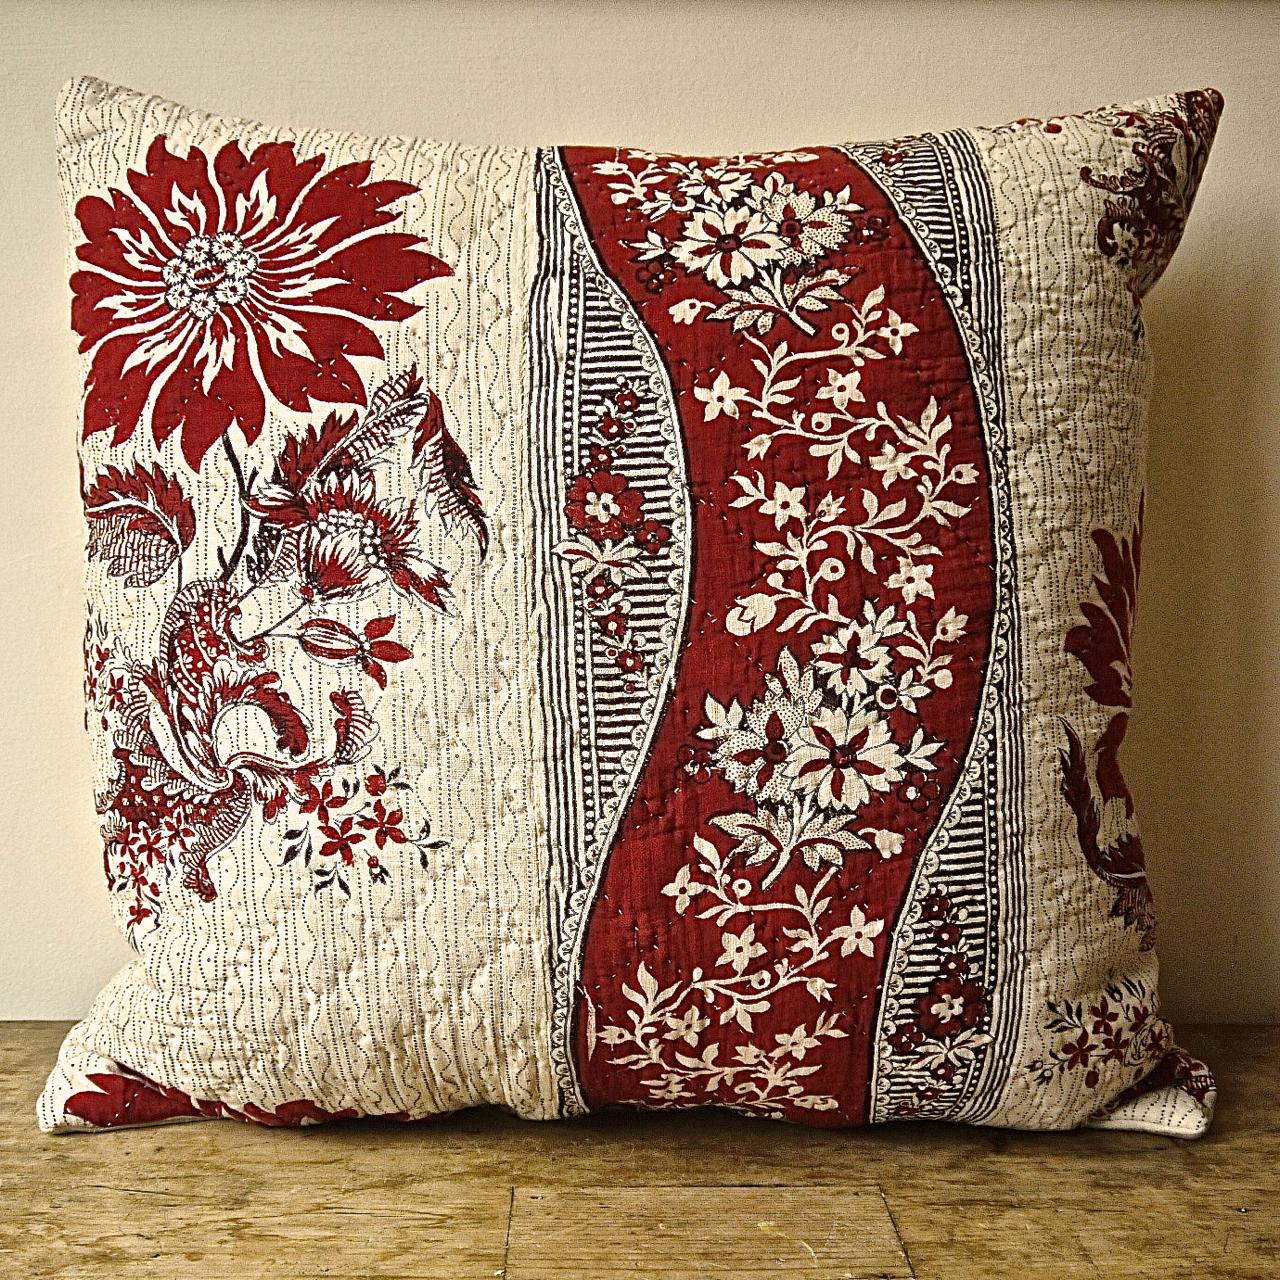 Red and White Stylised Flower Block Printed Cotton Pillow, French, 18th Century For Sale 6